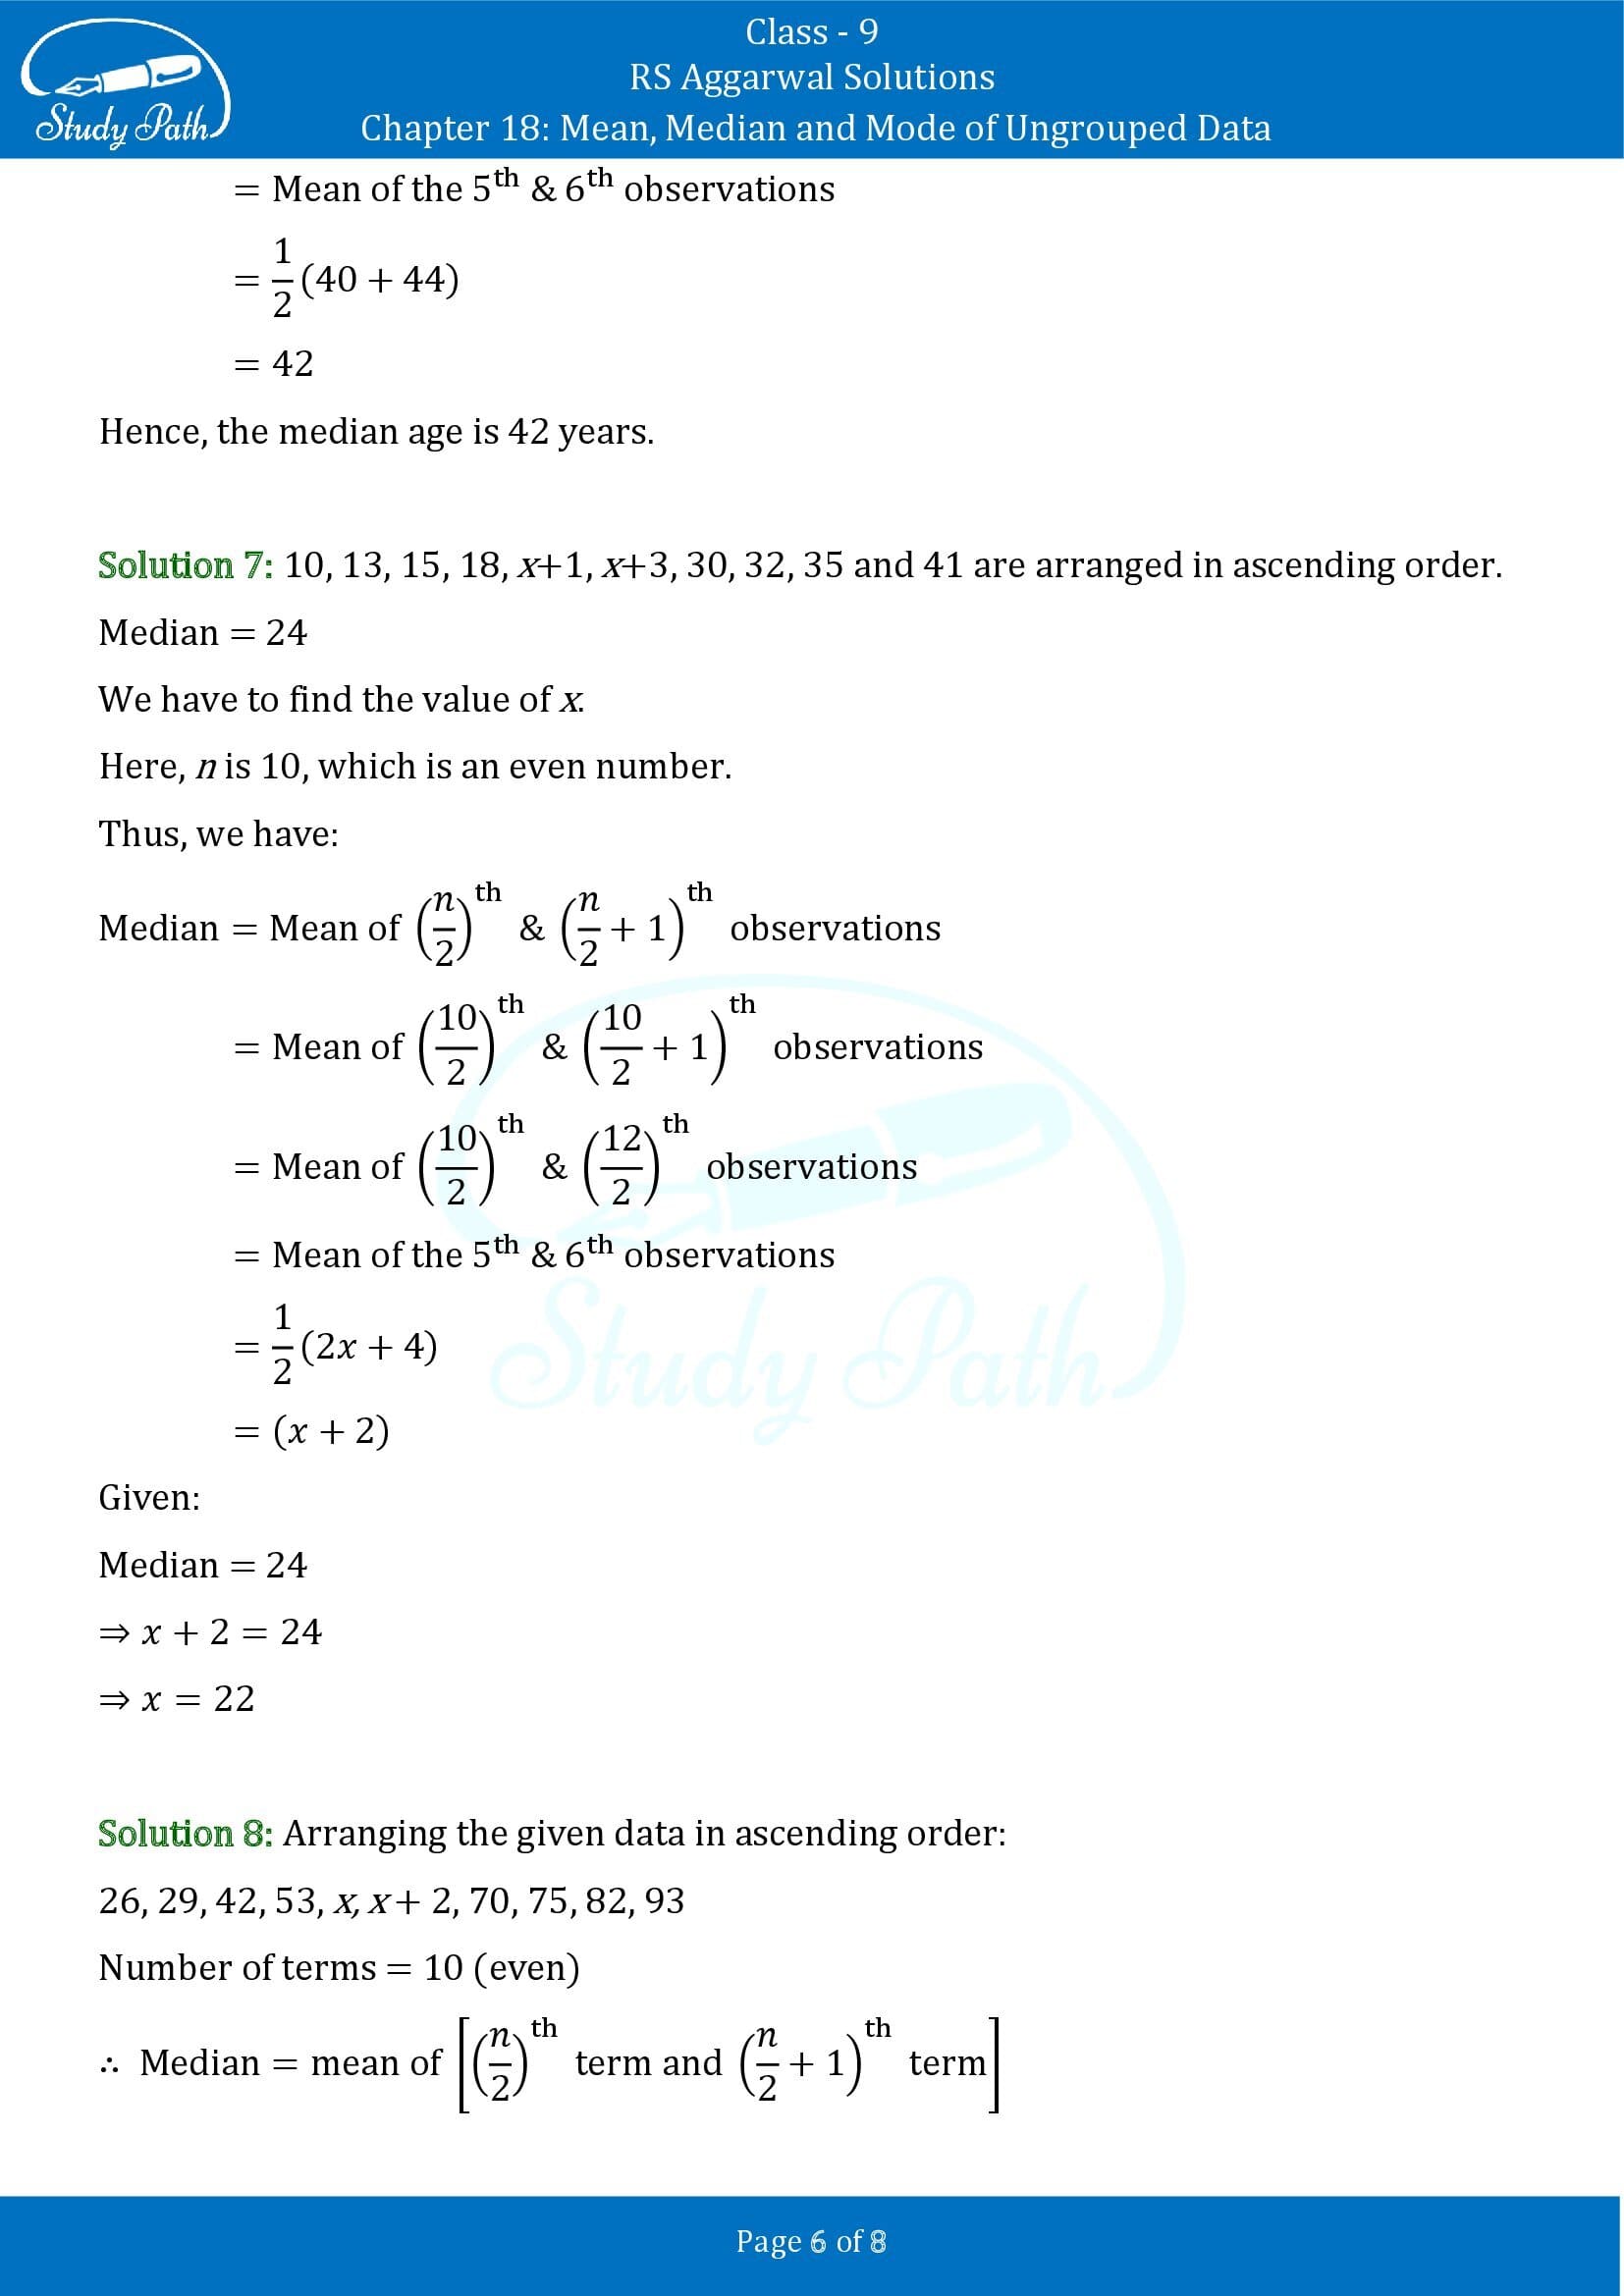 RS Aggarwal Solutions Class 9 Chapter 18 Mean Median and Mode of Ungrouped Data Exercise 18C 0006